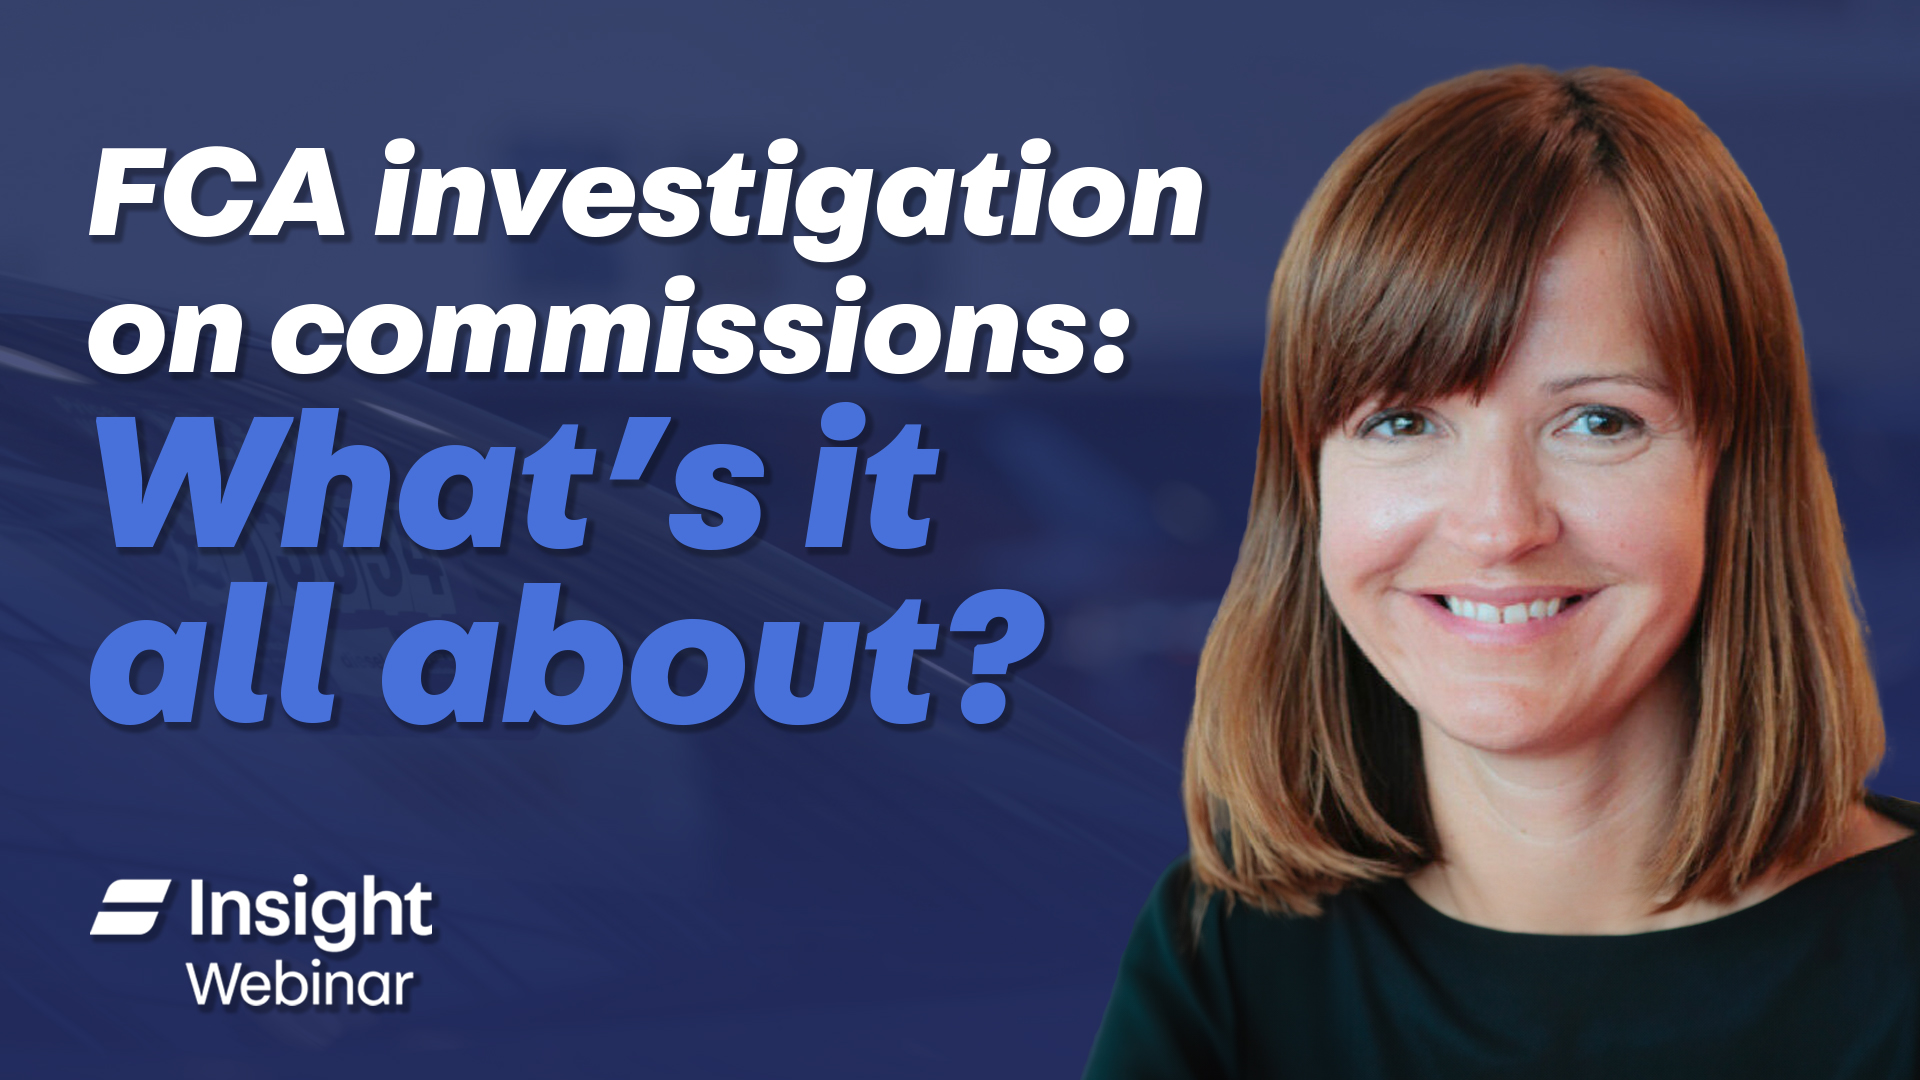 FCA Investigation on commissions: What's it all about?